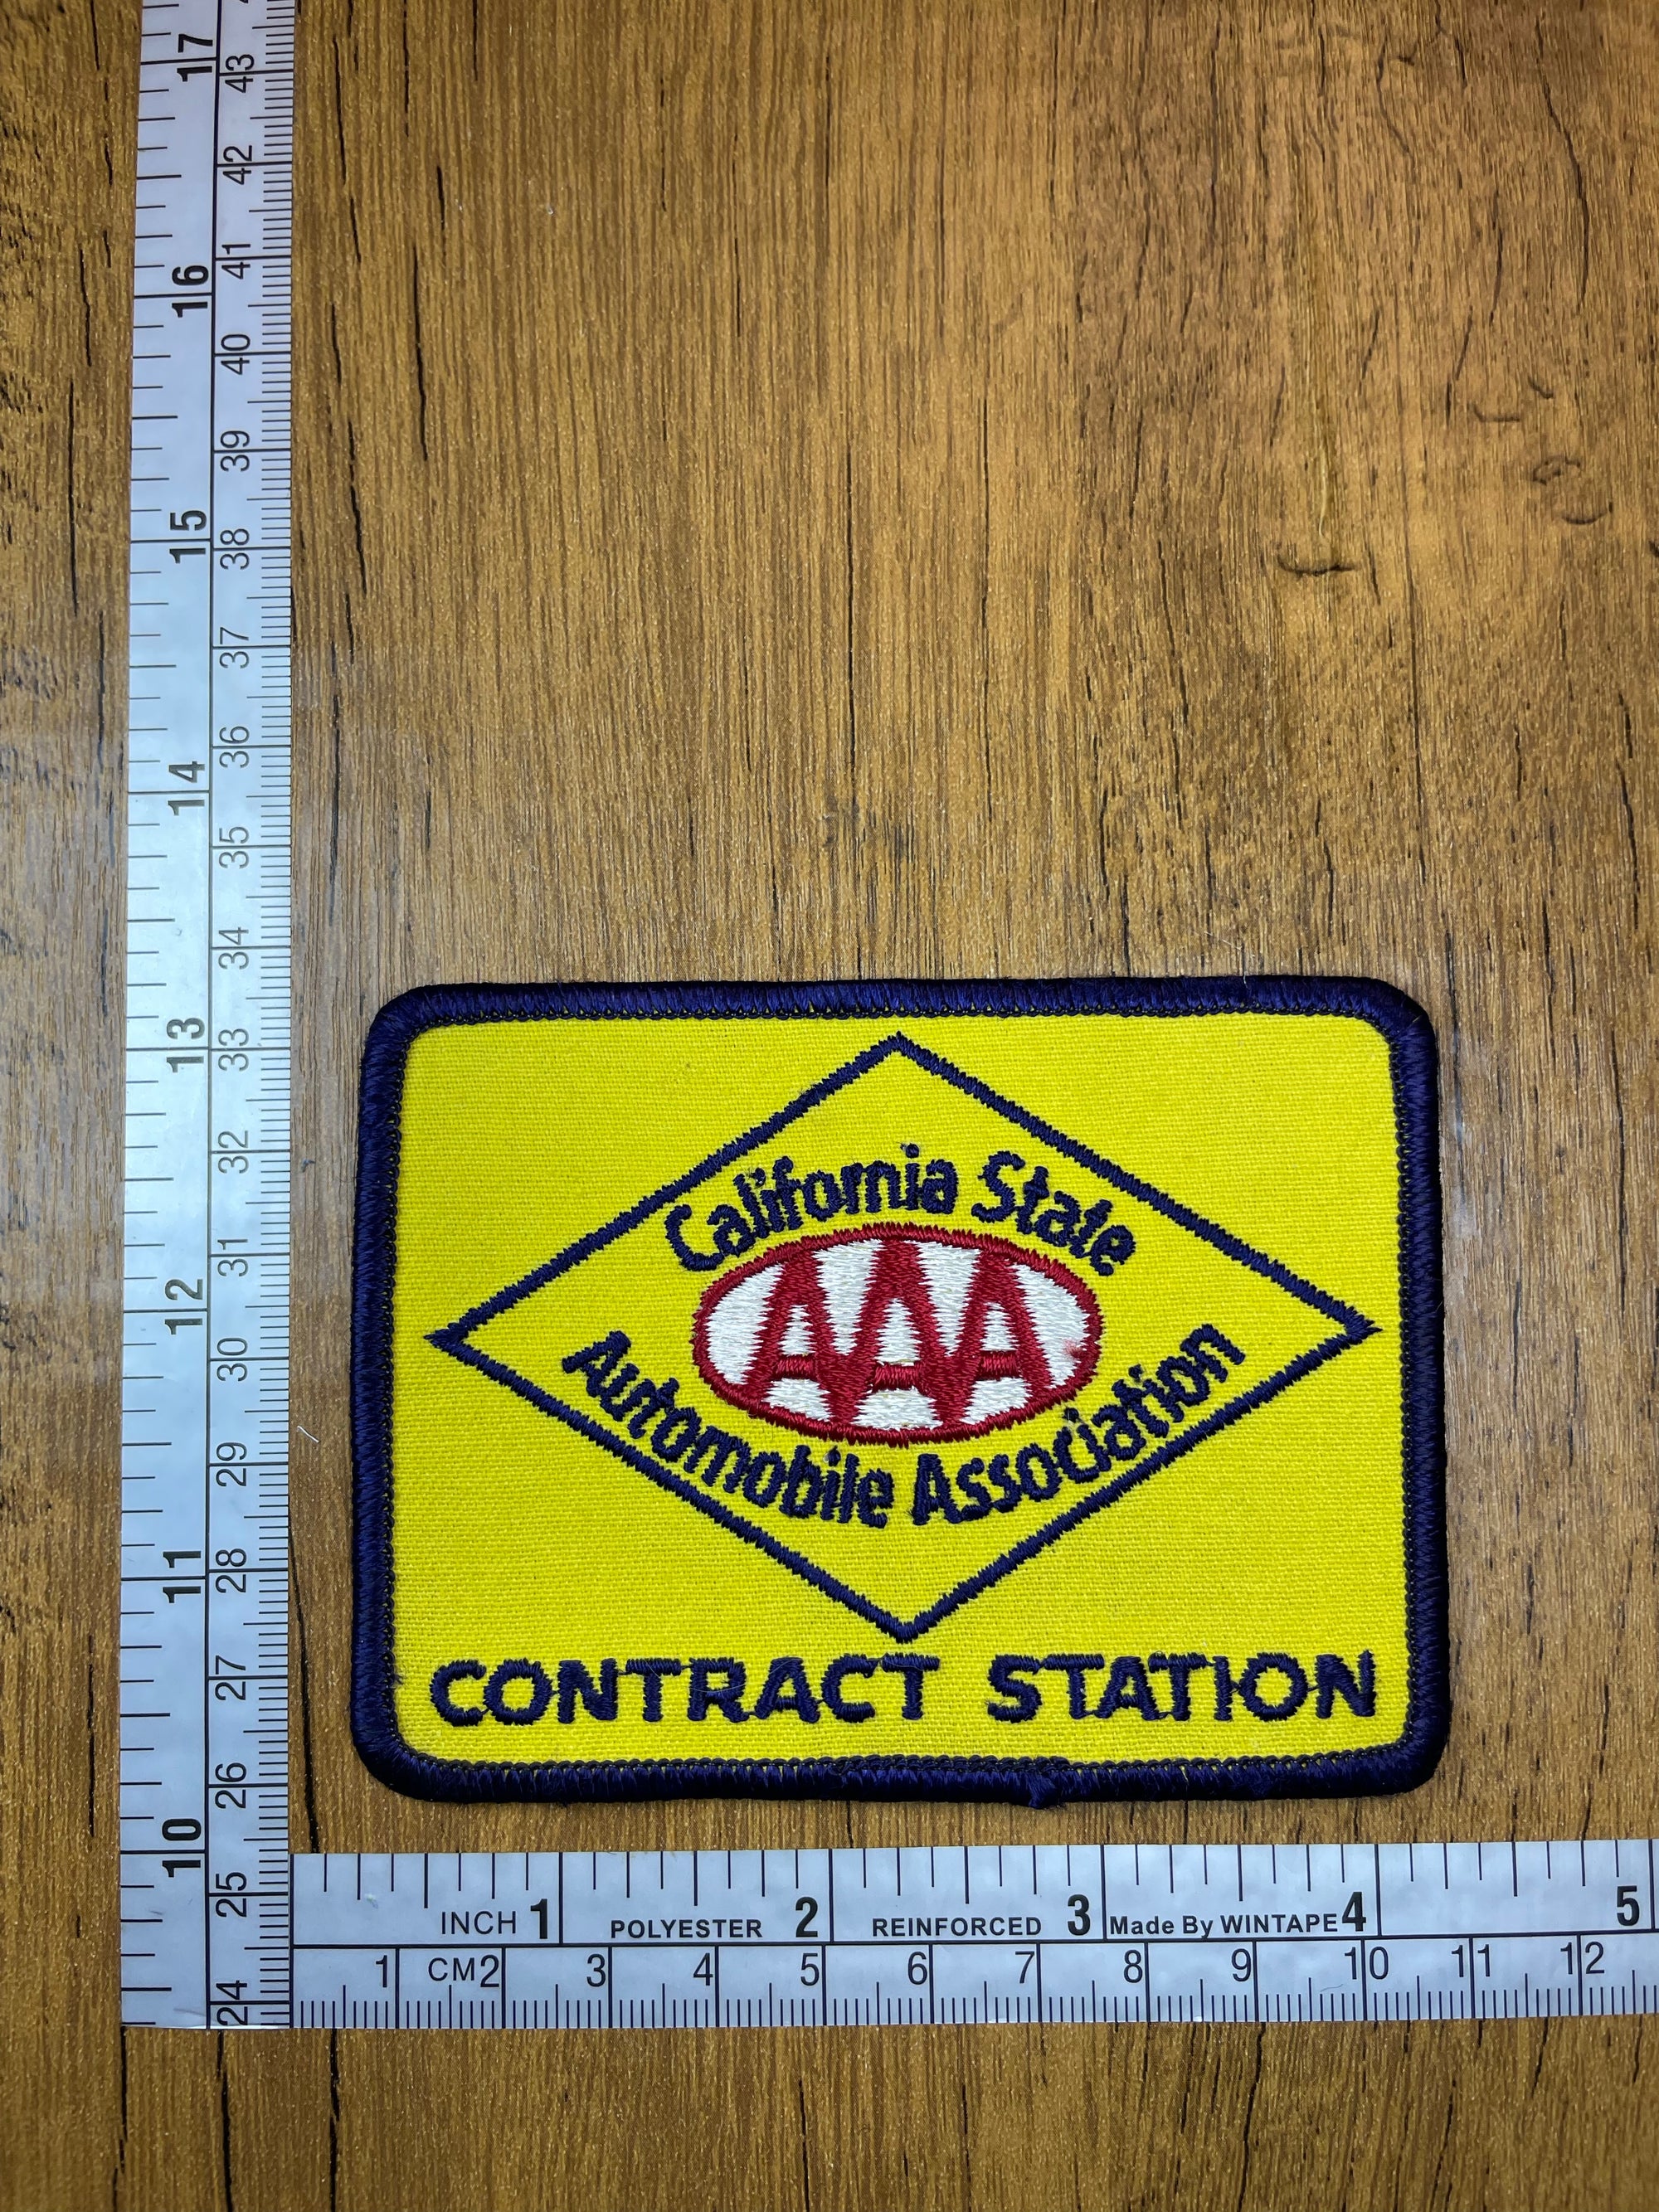 Vintage California State Automobile Association Contract Station- AAA, Cars, Trucks, Tires